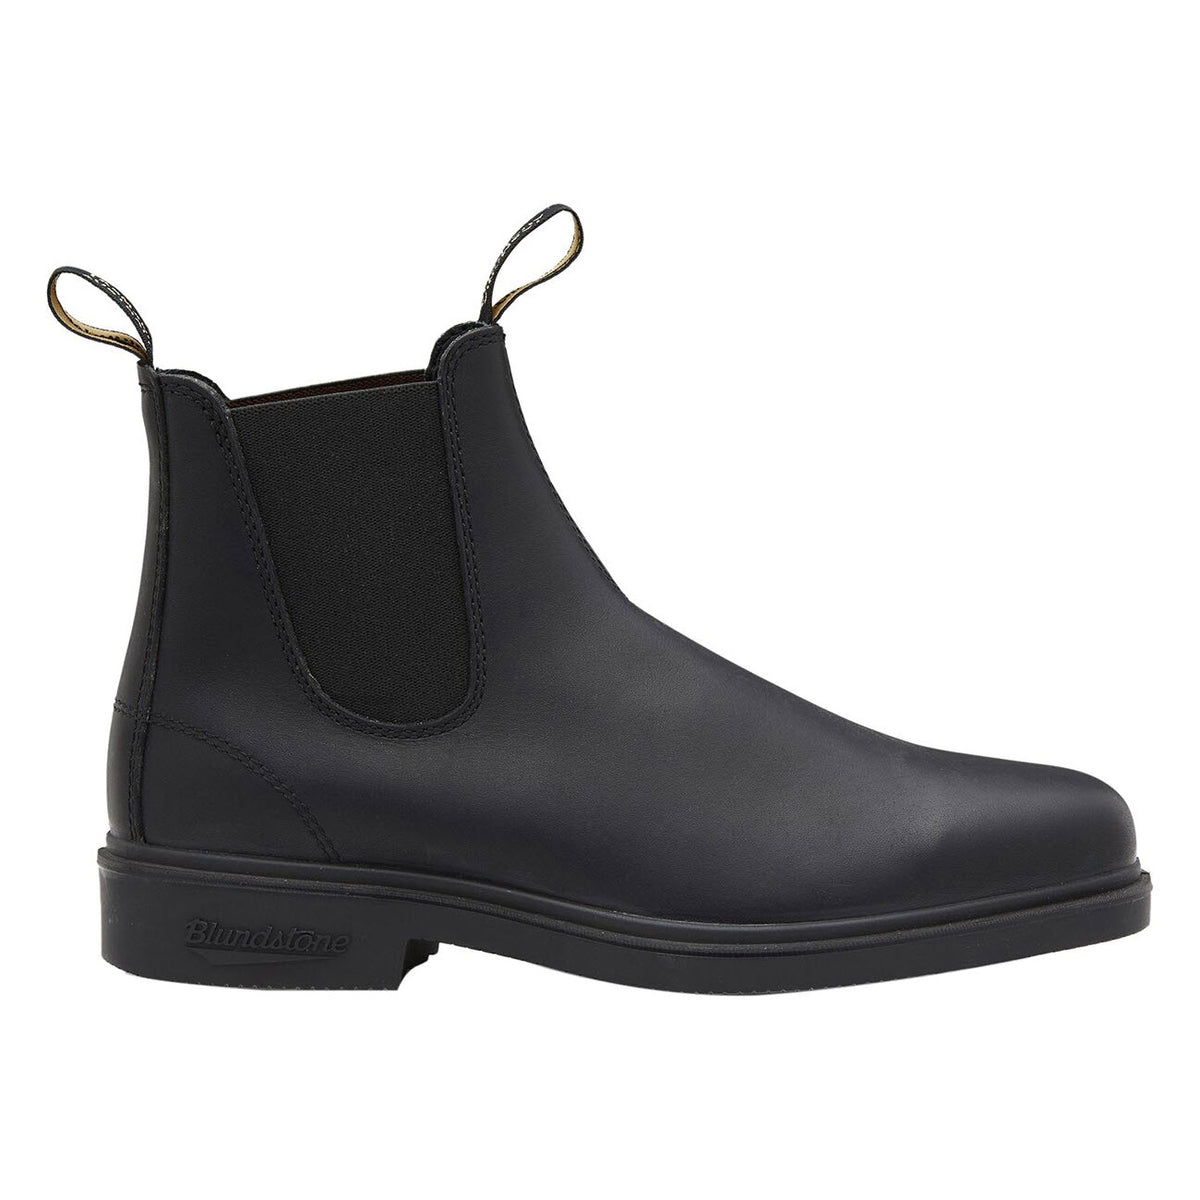 Blundstone 063 Dress Boot Black - Women&#39;s Chelsea boot with pull tabs, featuring a durable TPU outsole.